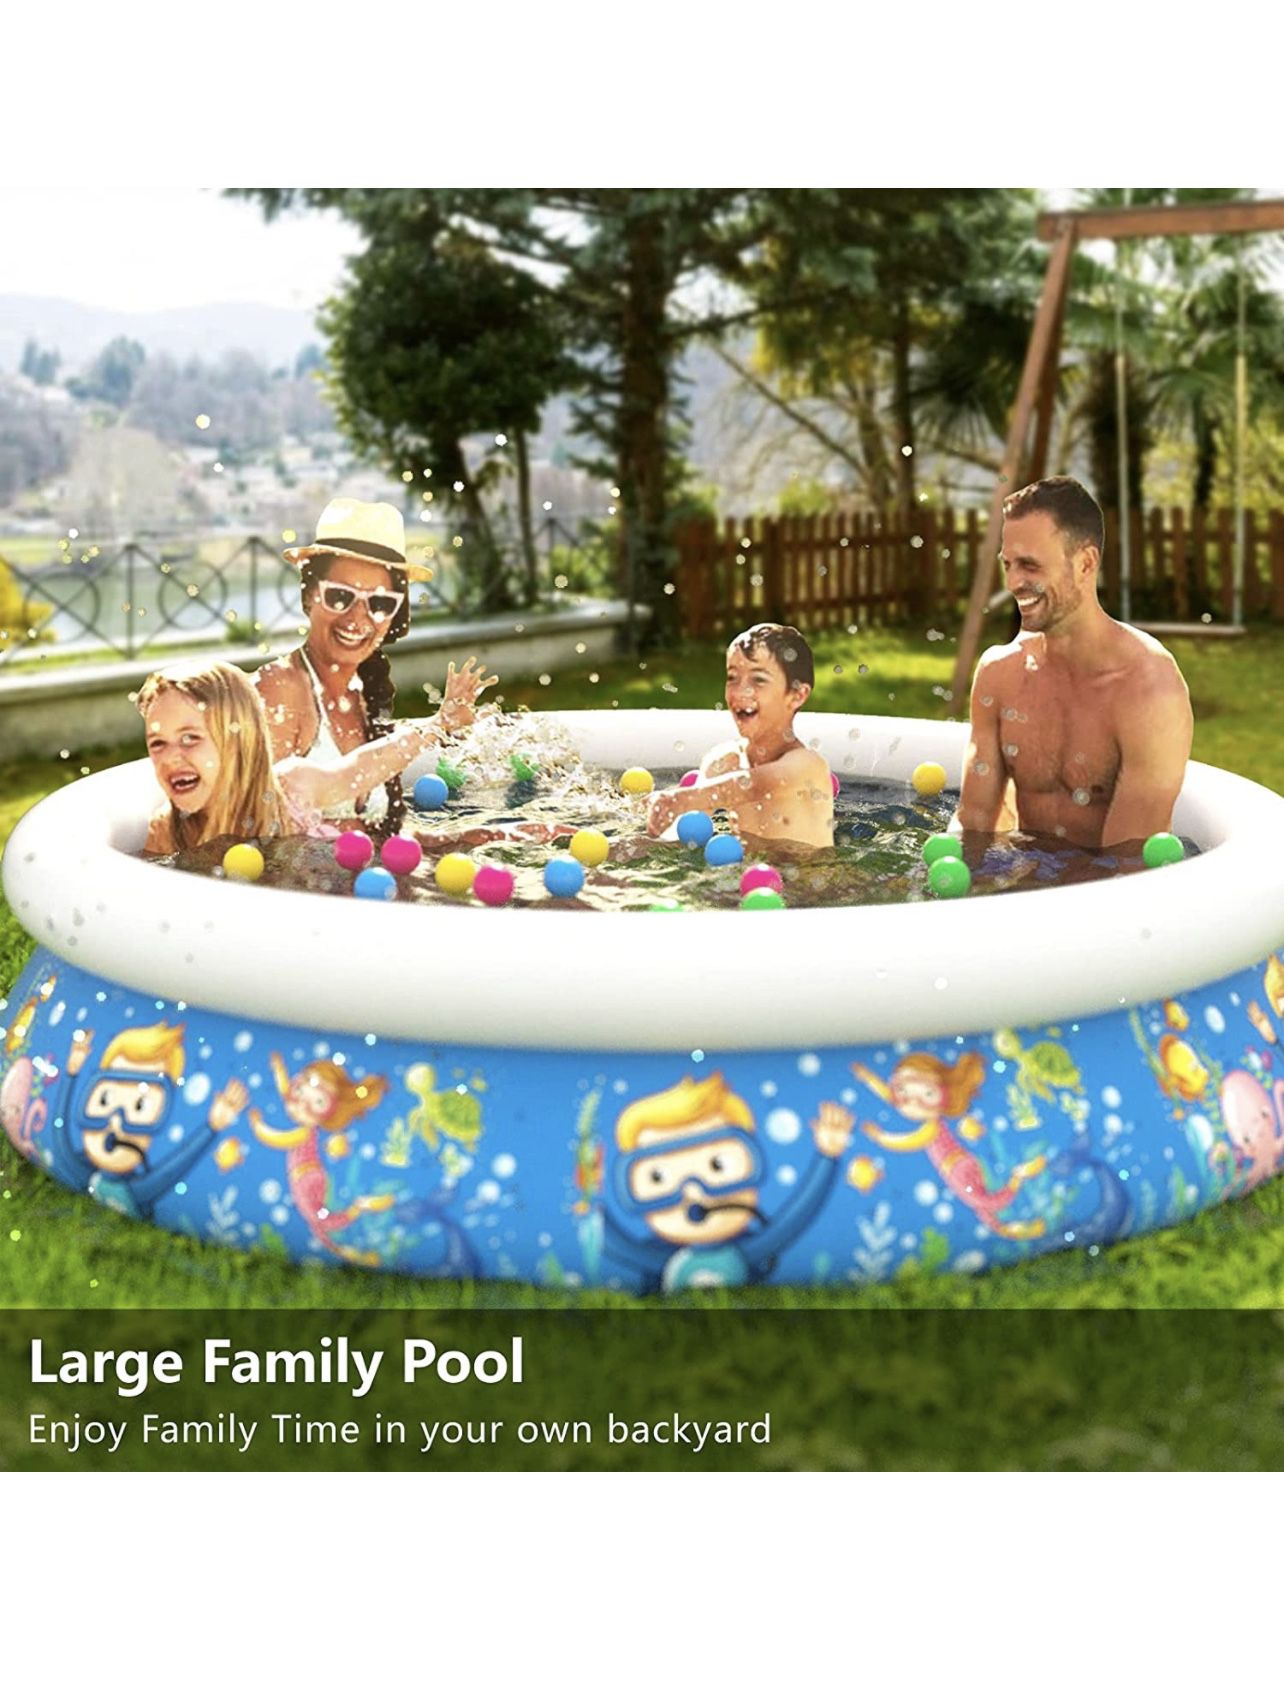 Inflatable Kids Kiddie Pool - Wading Pool for Toddler Durable Swimming Pool Family Above Ground Pool Summer Outside Round Pools for Children Adults